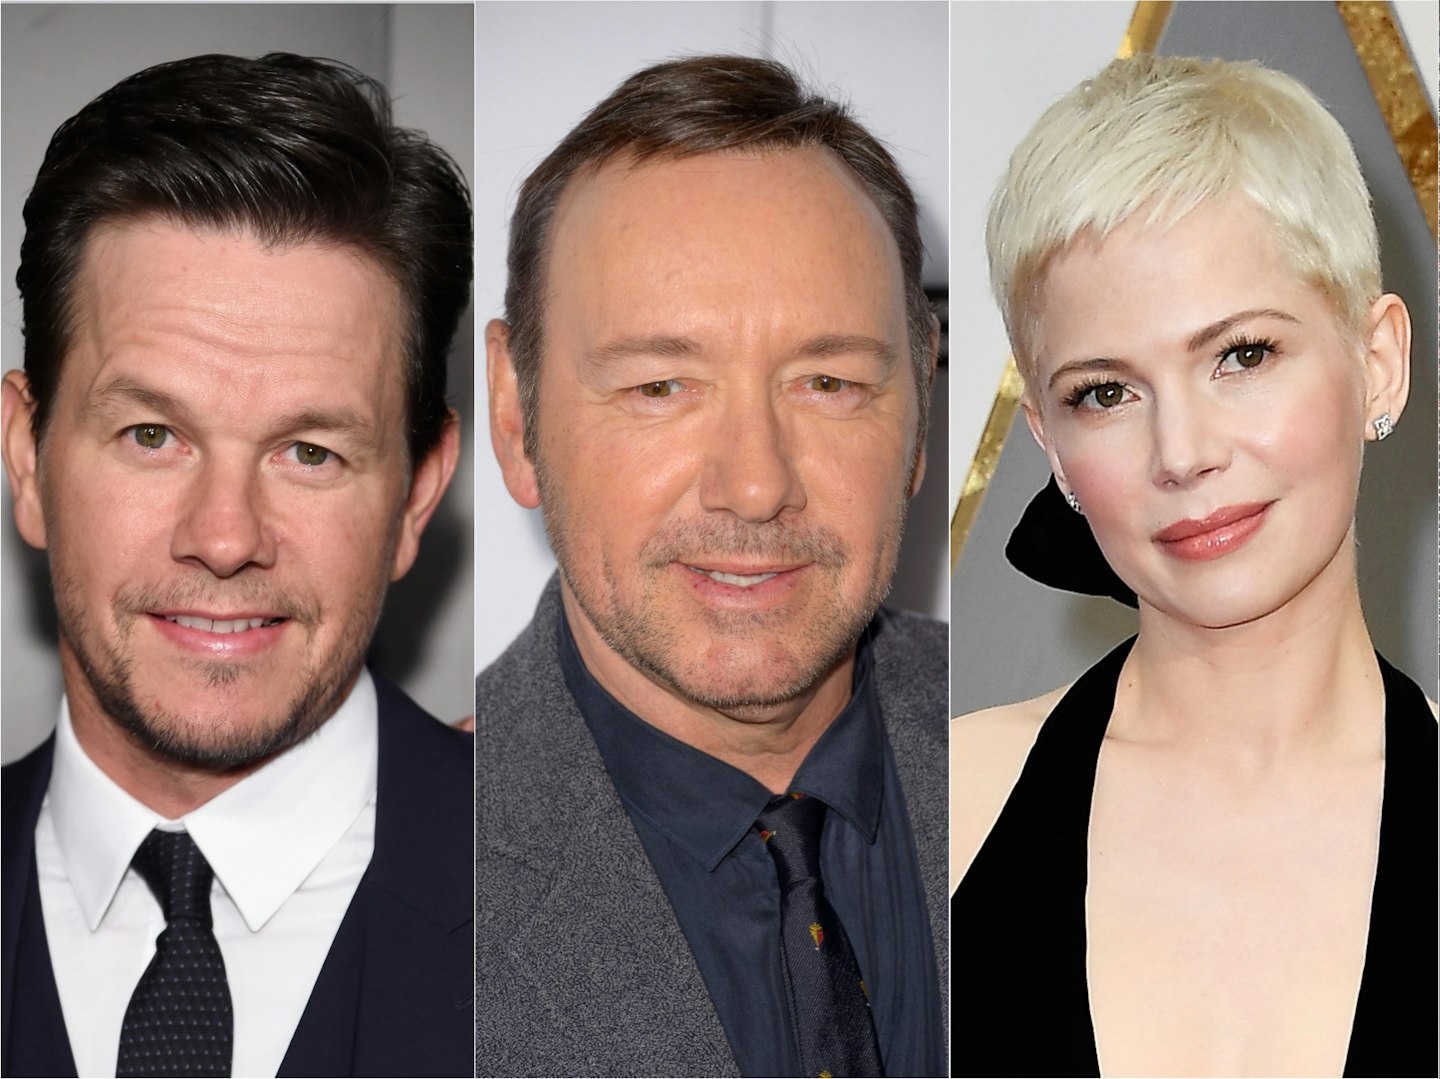 Mark Wahlberg, Kevin Spacey and Michelle Williams